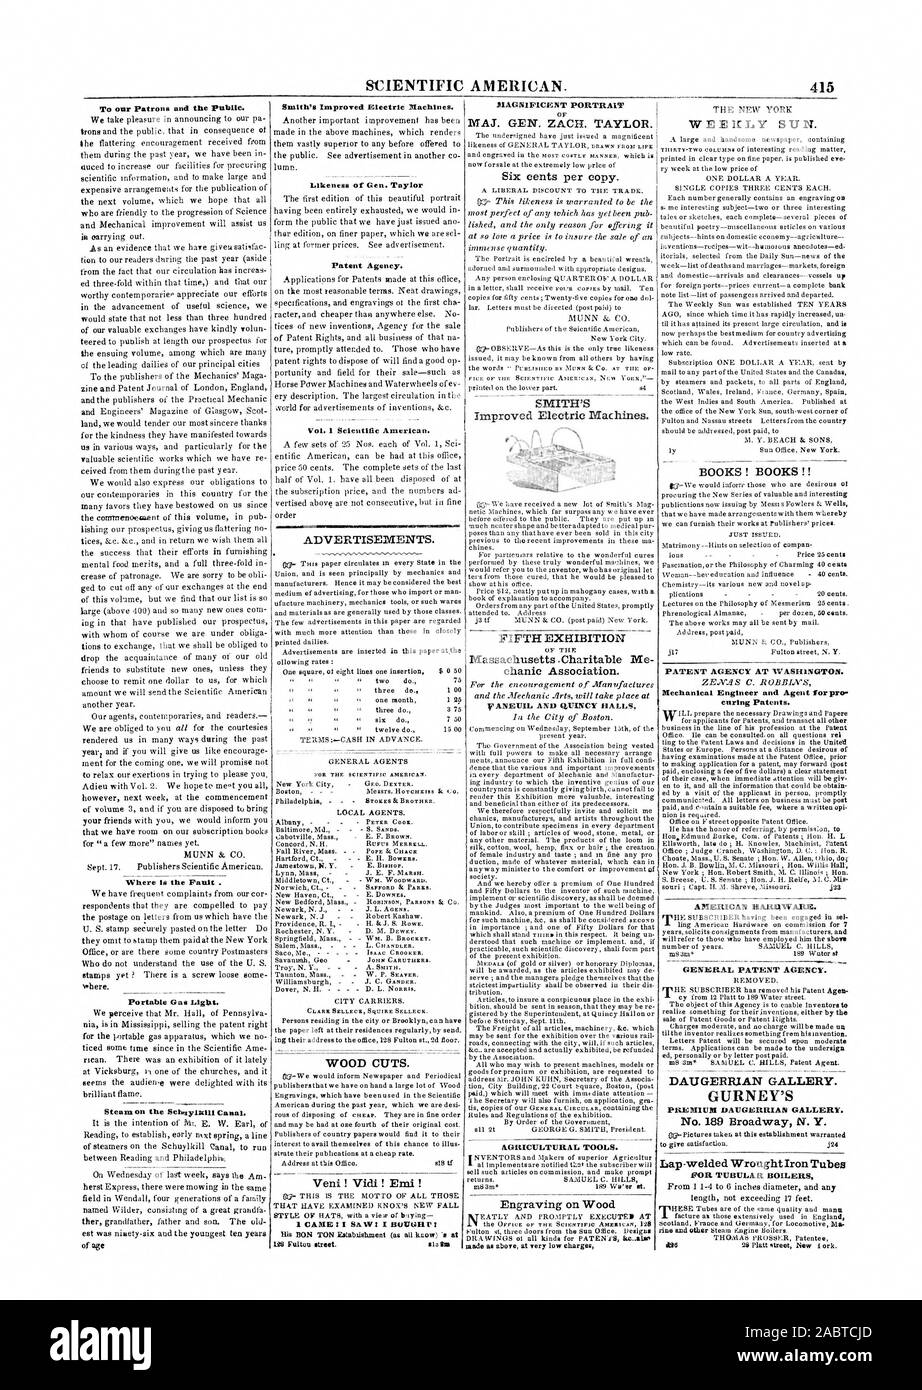 SCIENTIFIC AMERICAN. 415 To our Patrons and the Public. Where is the Fault . Portable Gas Light. Steam on the Schiyimin Canal. Smith's Improved Electric Machines. Likeness of Gen. Taylor  Patent Agency. Vol. I Scientific American. AD FOR THE SCIENTIFIC AMERICAN. WOOD CUTS. Veni ! Vidi ! Emi ! His BON TON Estabiishment (as all know) 's at IN Fulton street. slo Ma MAGNIFICENT PORTRAIT Six cents per copy. SMITH'S Improved Electric Machines. ' FIFTH EXHIBITION chanic Association. V ANEUIL AND QUINCY IIALLS AGRICULTURAL TOOLS. Engraving on Wood made as above at very low charges WEEitLY SUN. BOOKS Stock Photo